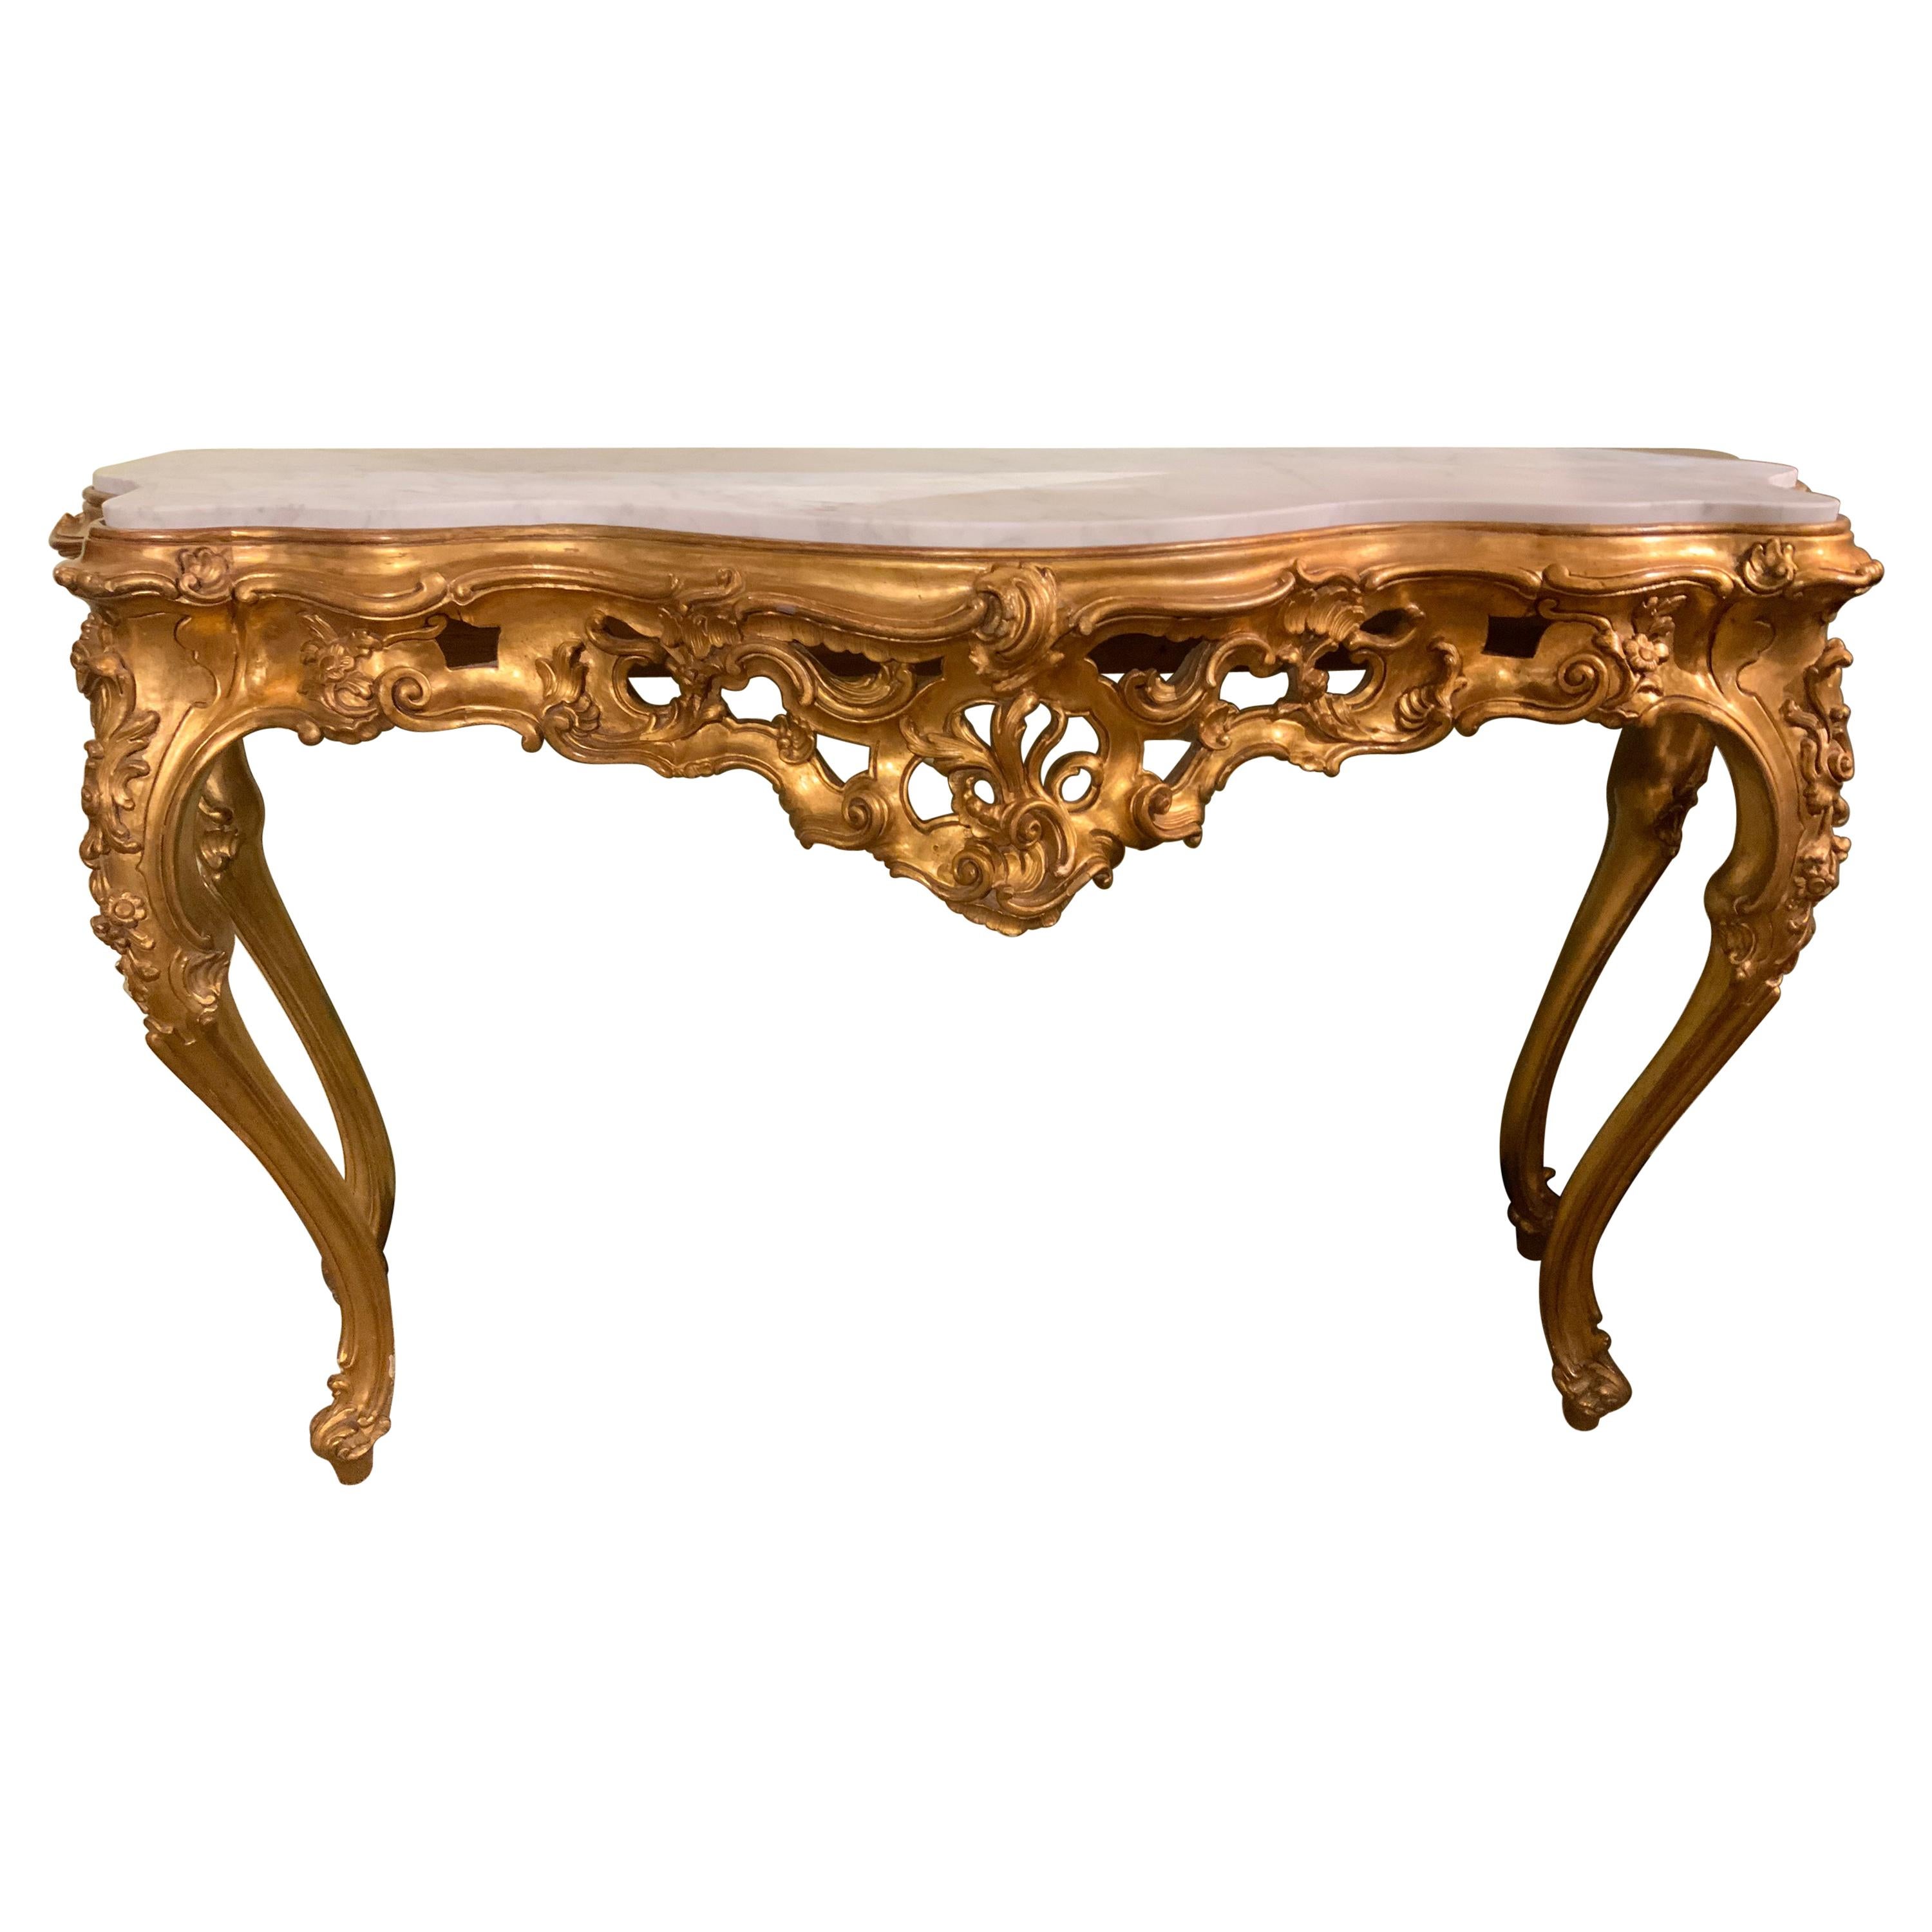 Italian Giltwood and White Marble-Top Console Table with Scrolls /Floral Motif For Sale